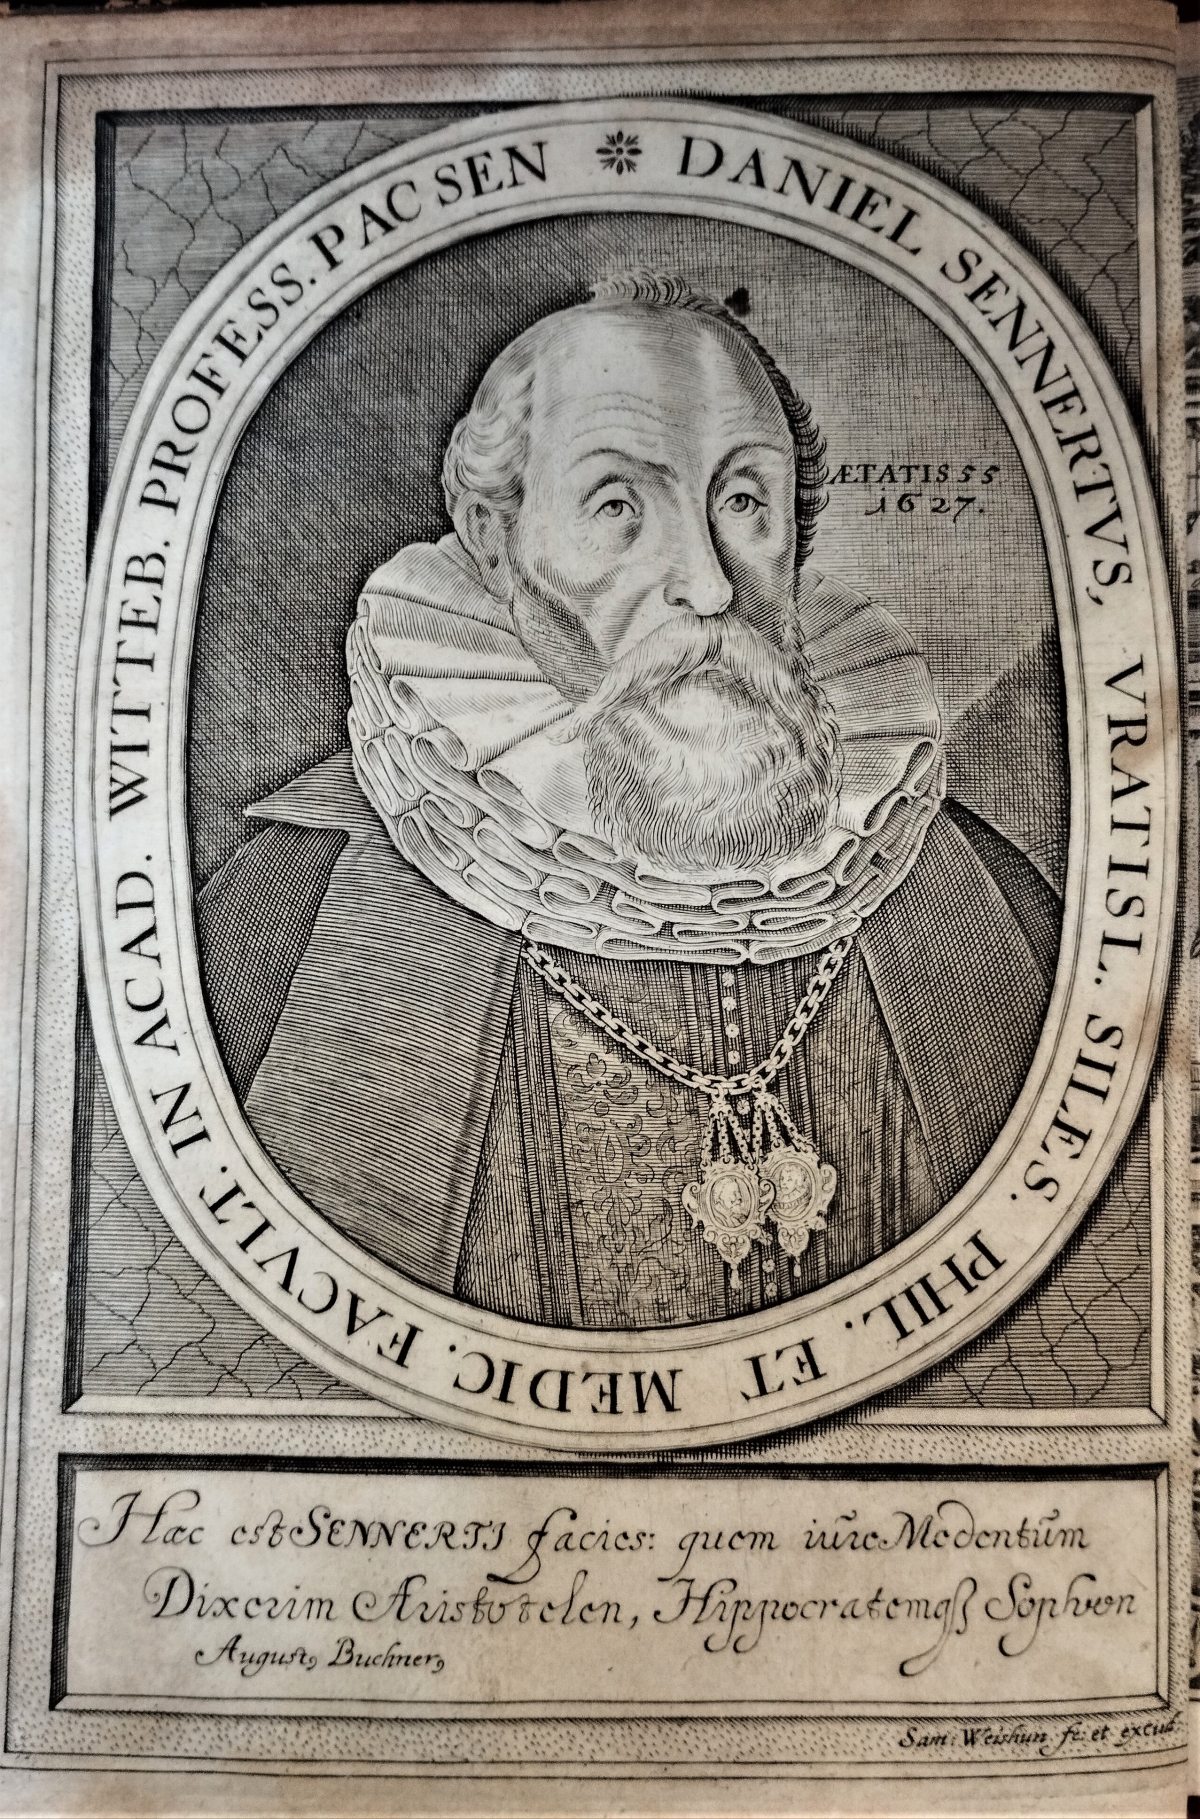 Engraved portrait with a three-quarter view of the head and shoulders of a middle-aged man in early modern dress, including a ruff collar and necklace, with the texts 'aetatis 55, 1627' and (in a border) 'Daniel Sennertus Vratisl. Siles.'